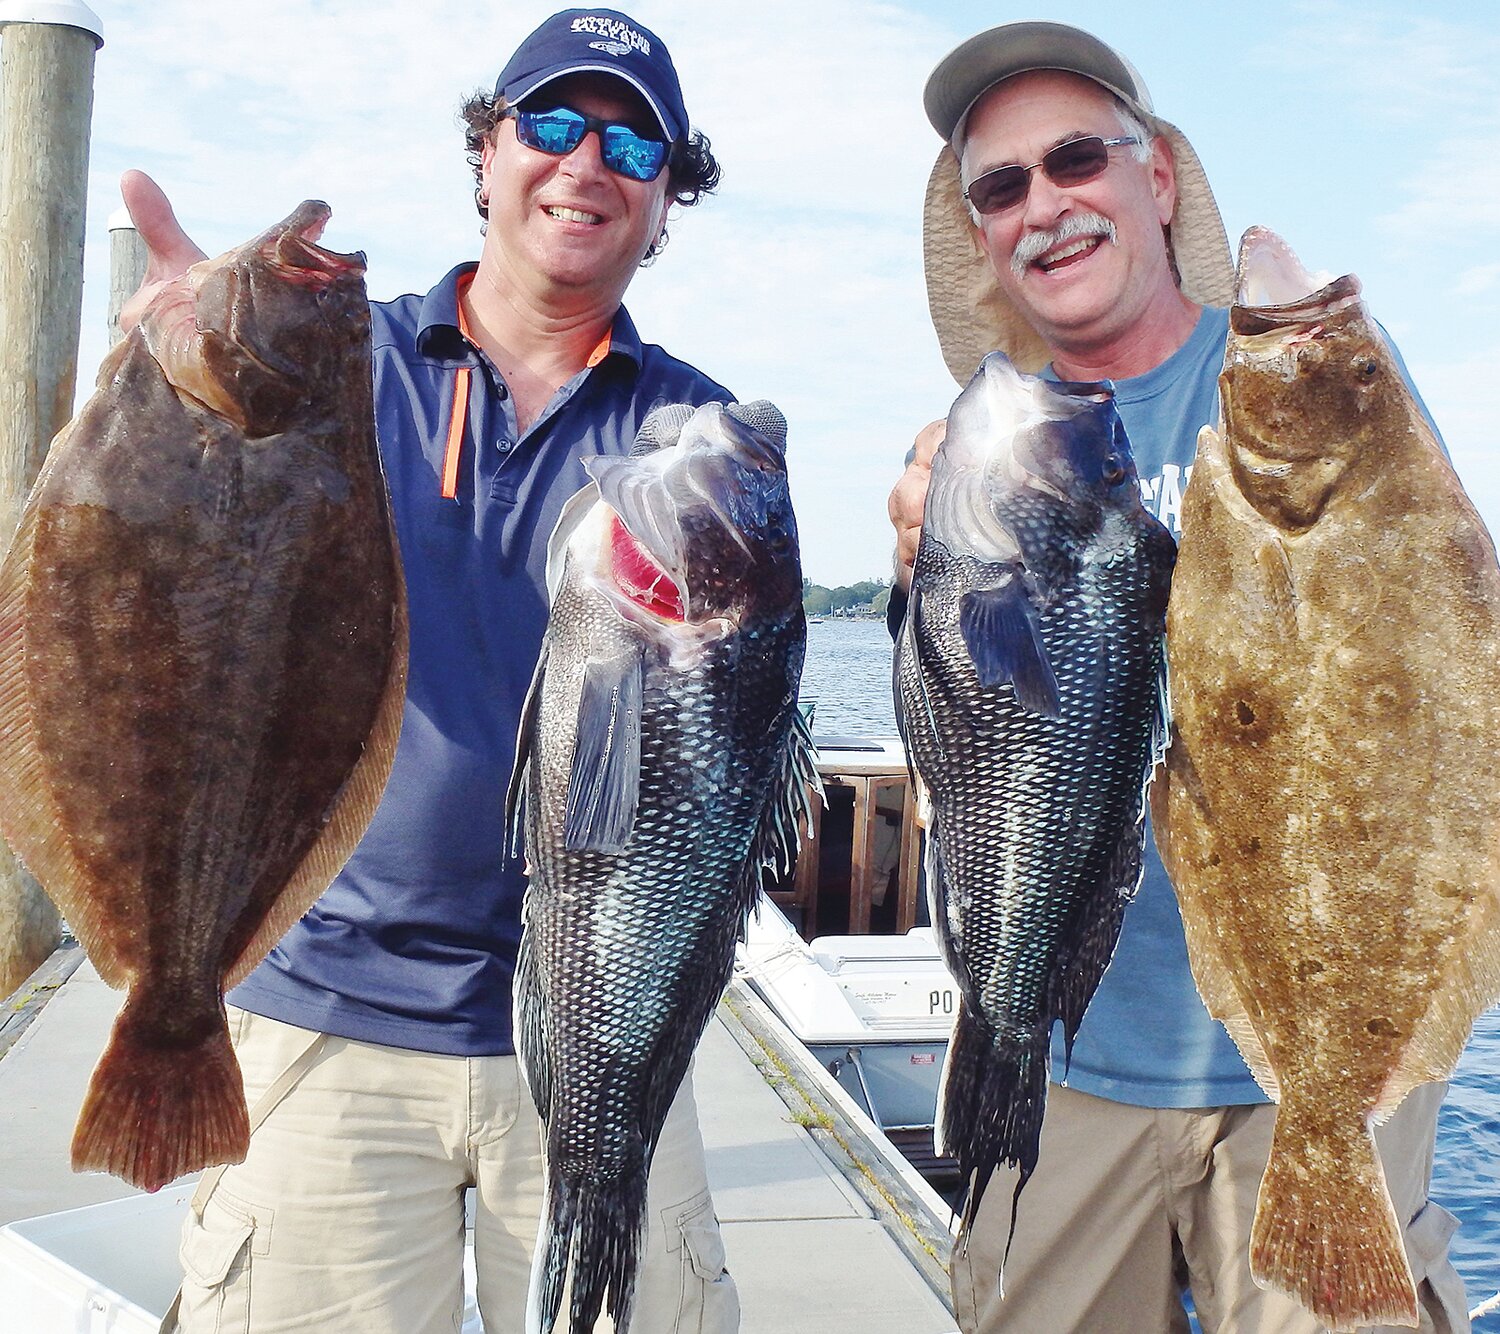 The Block Island Inshore Fishing Tournament will include fluke, black sea bass, striped bass, bluefish, boat, shore, fly fishing, youth, team and wind farm photo contest divisions.